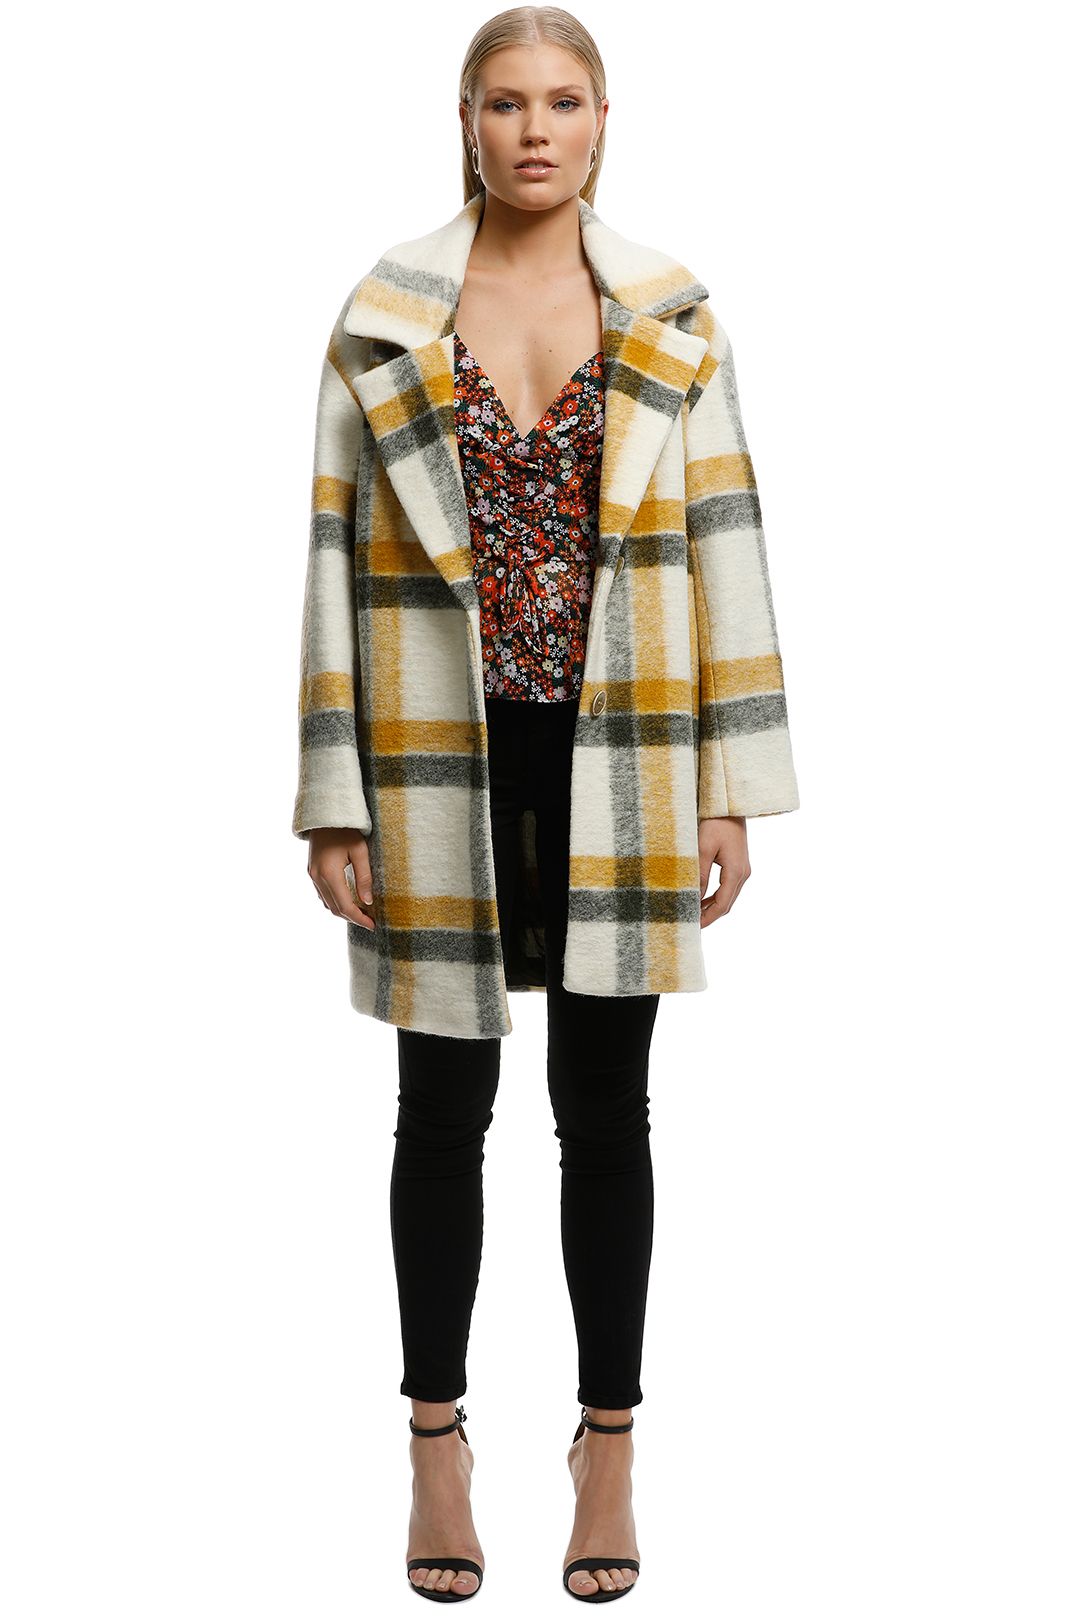 MNG - Unstructured Virgin Wool Coat - Check Print - Front